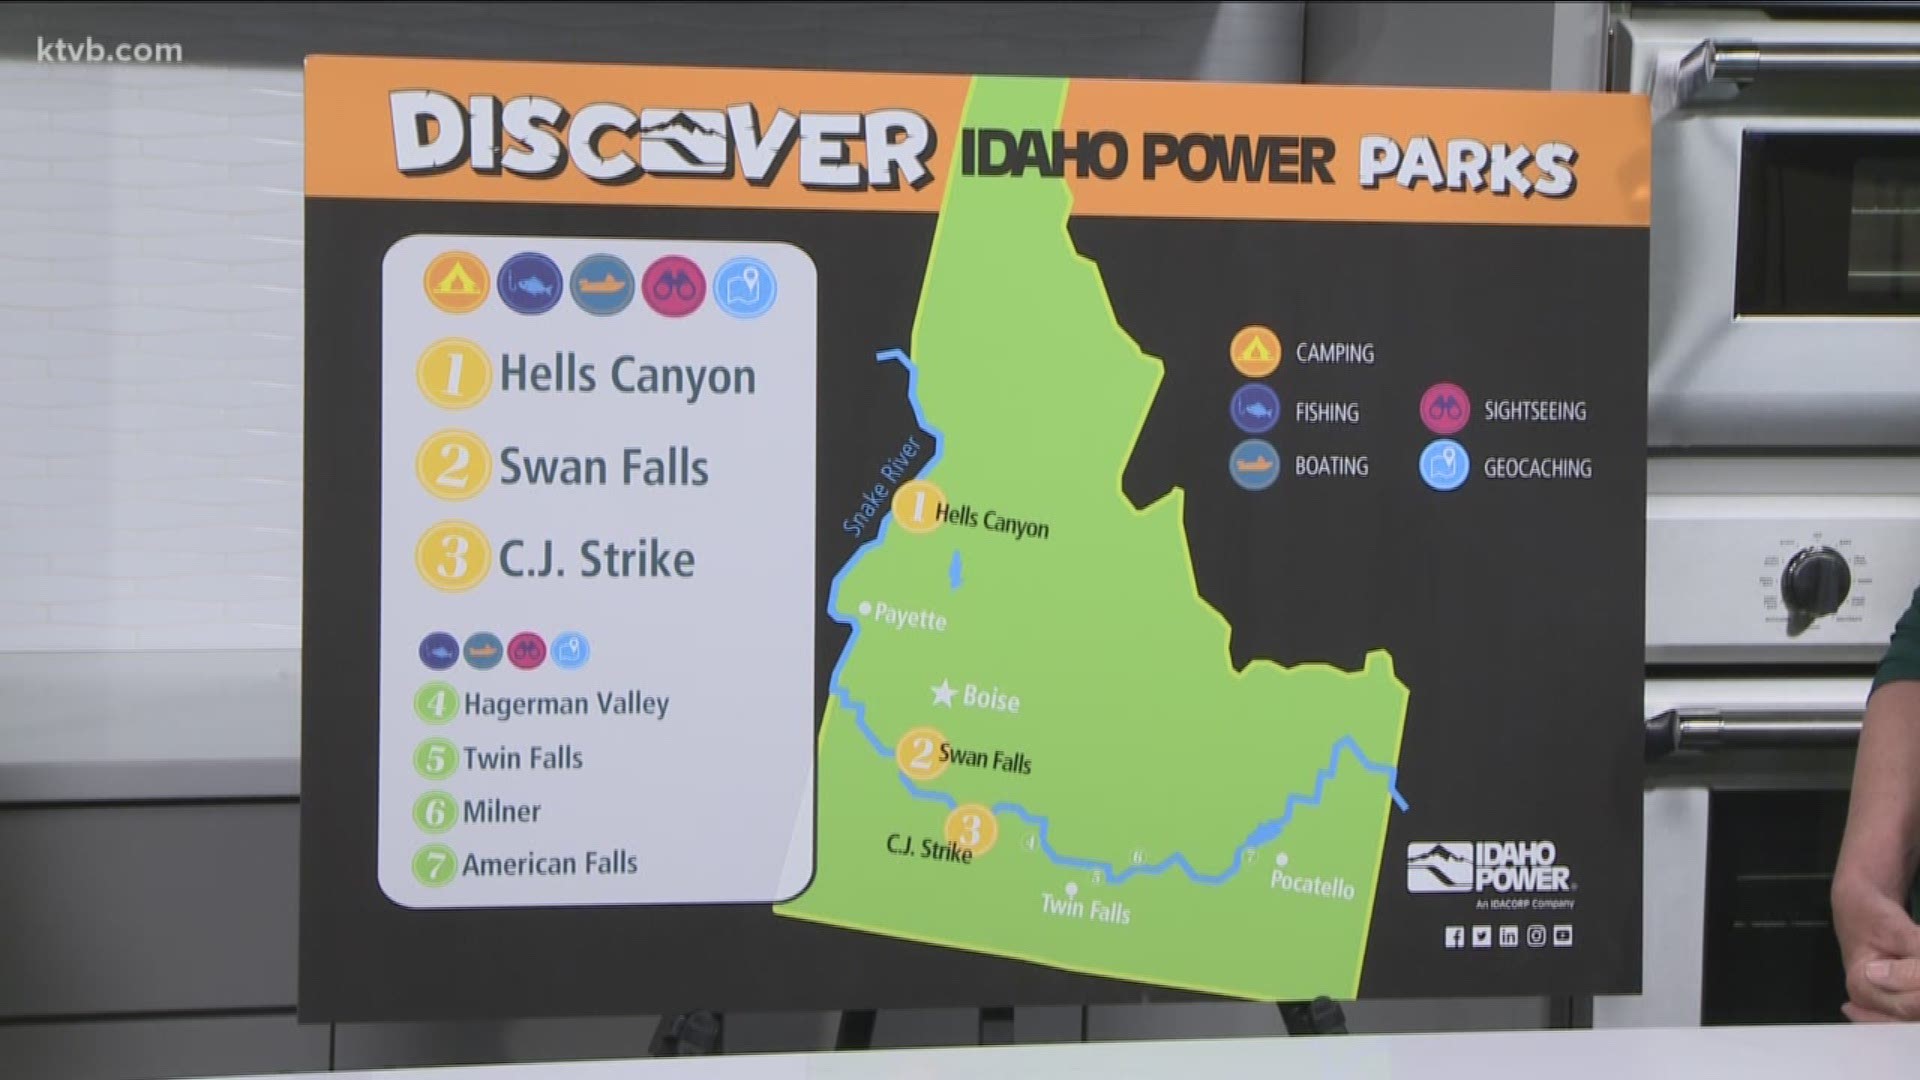 Idaho Power talks about their new online reservation feature for their campgrounds.